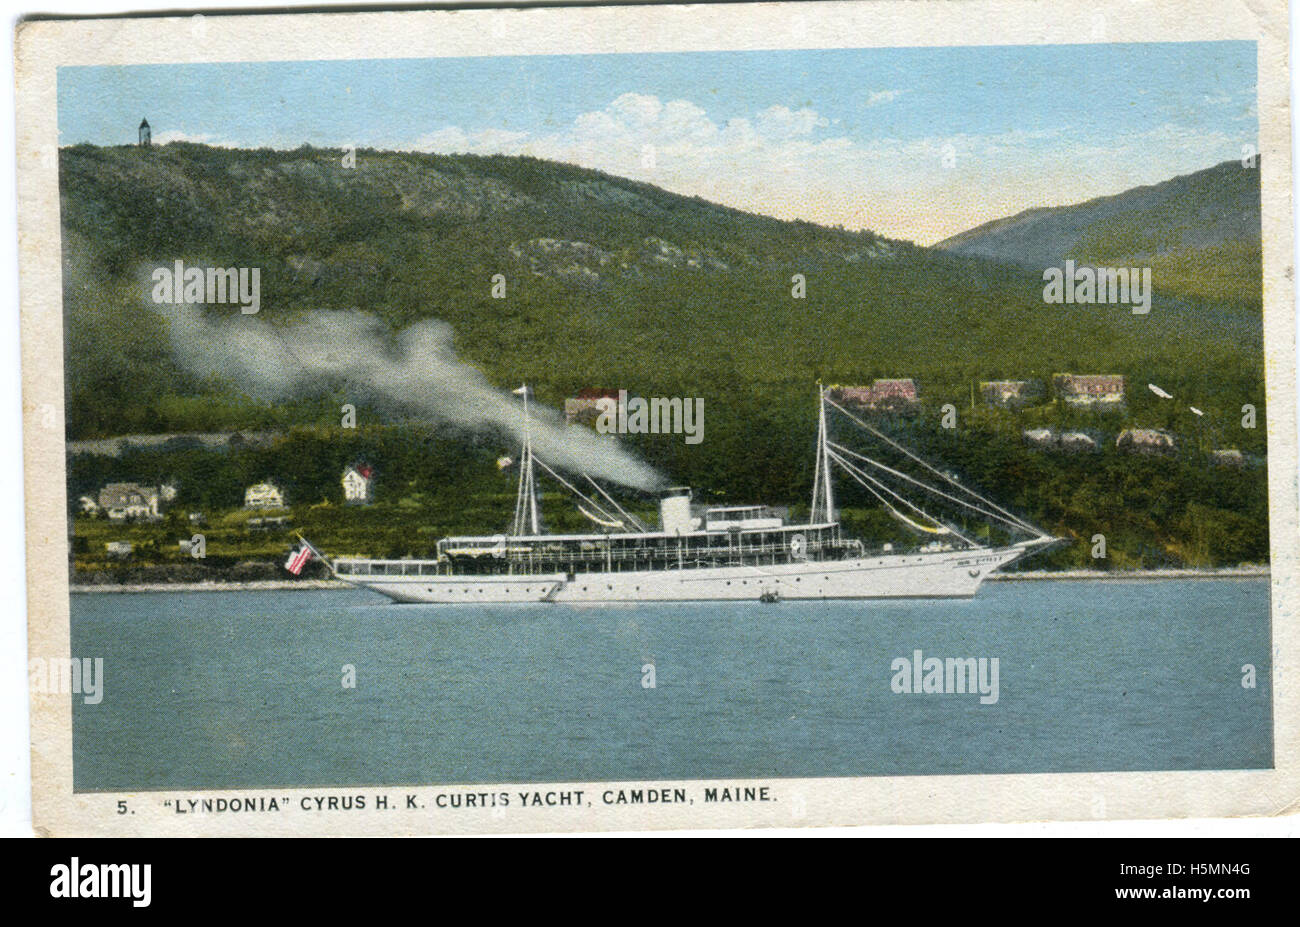 A colorized view of the steam yacht &quot;Lyndonia.&quot;  Mount Battie with a tower can be seen in the background.  Houses are also visible--this stretch is likely Sherman's Cove.  The Lyndonia belonged to Cyrus H.K. Curtis and was built in 1920 by the Consolidated Ship Company of Morris Heights, New York.  In 1940, she was sold to Pan American Airways.  Her name was changed to M.V. Southern Seas.  The U.S. Army purchased her in 1941 for use as a quarters ship, and she was officially rechristened the U.S.S. Southern Seas in 1942.  She sank off of Okinawa during Typhoon Louise in October 1945. Stock Photo